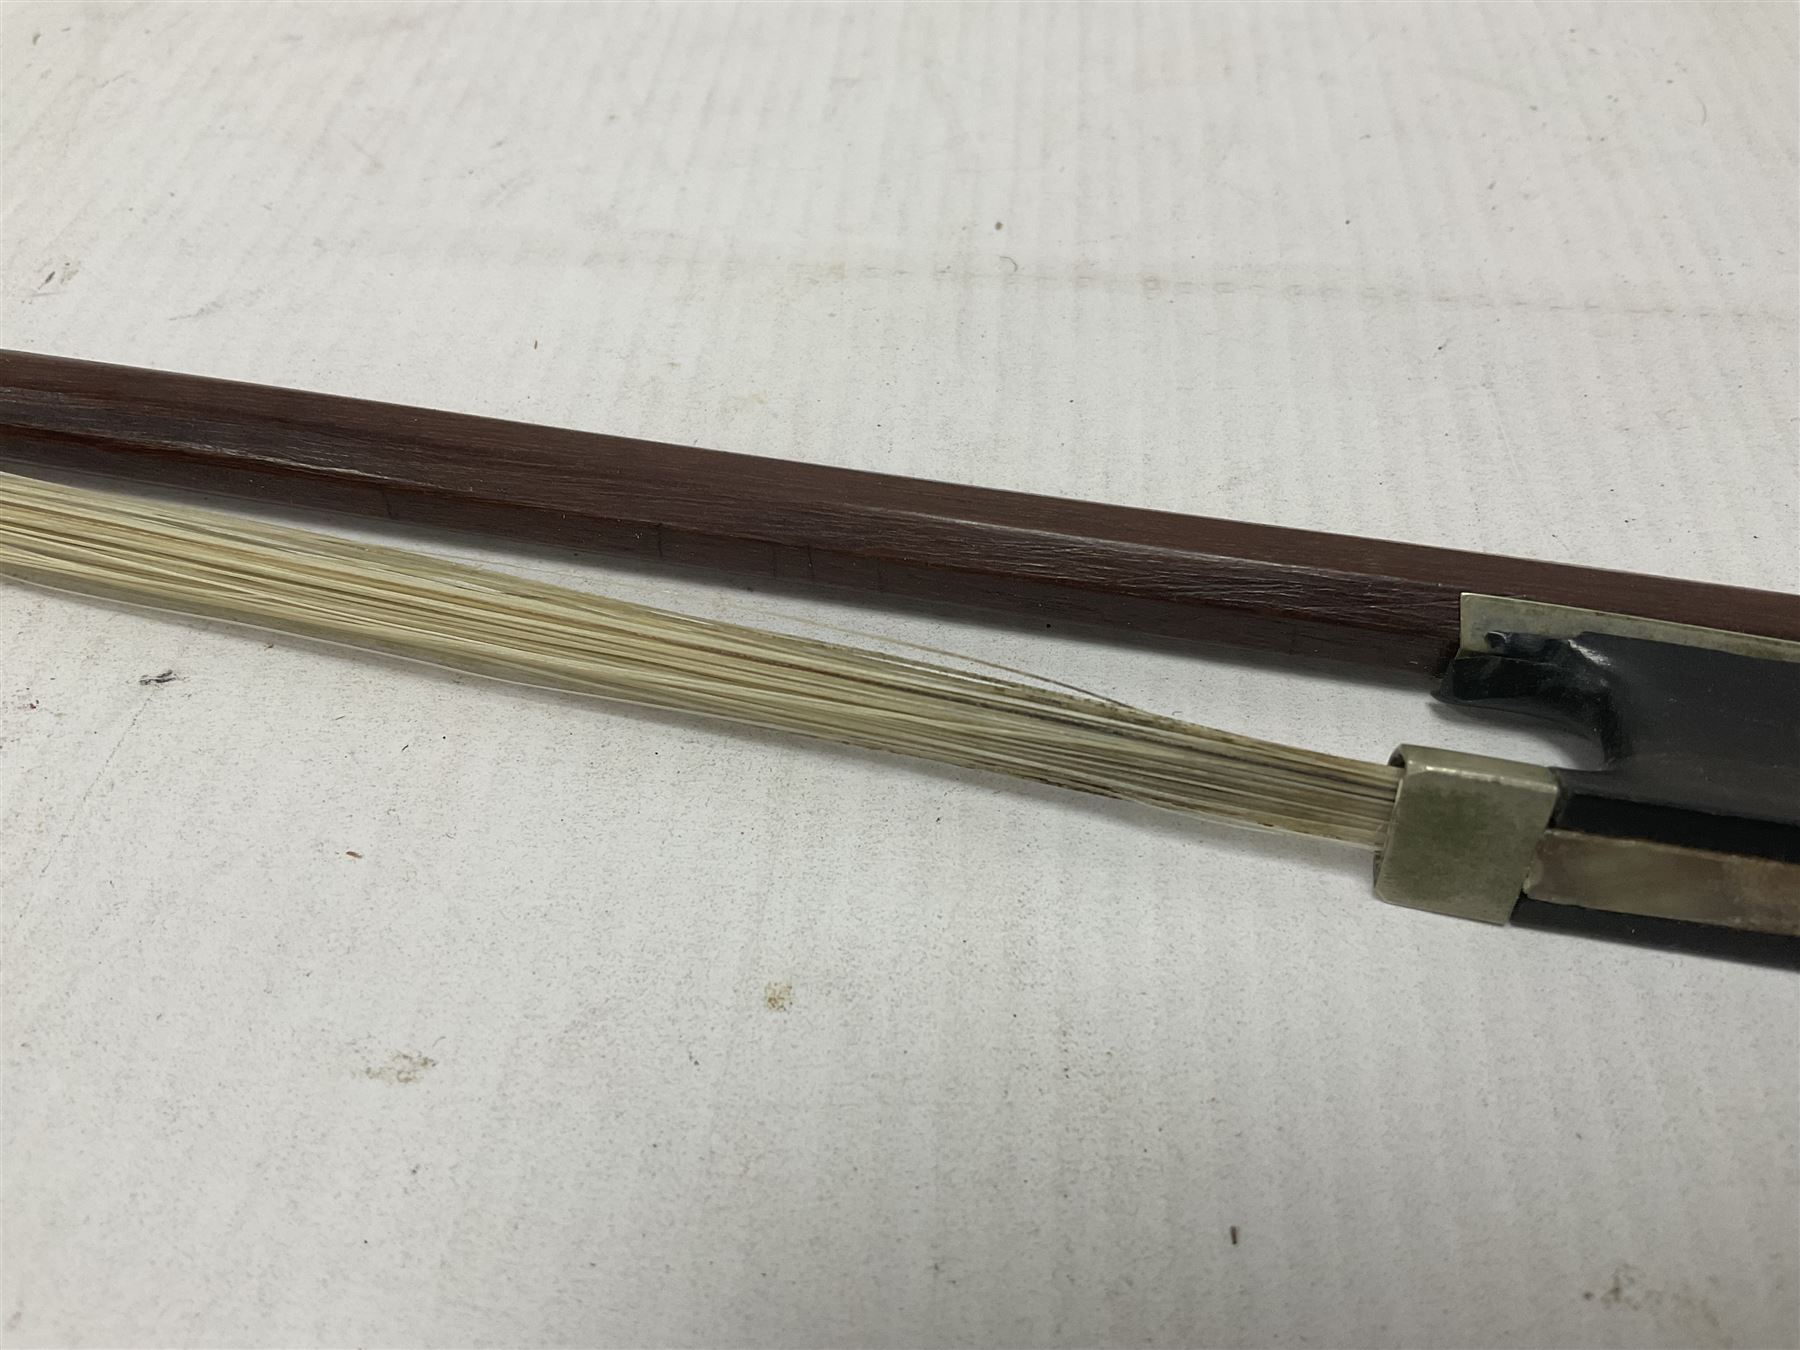 Wooden violin bow - Image 4 of 9